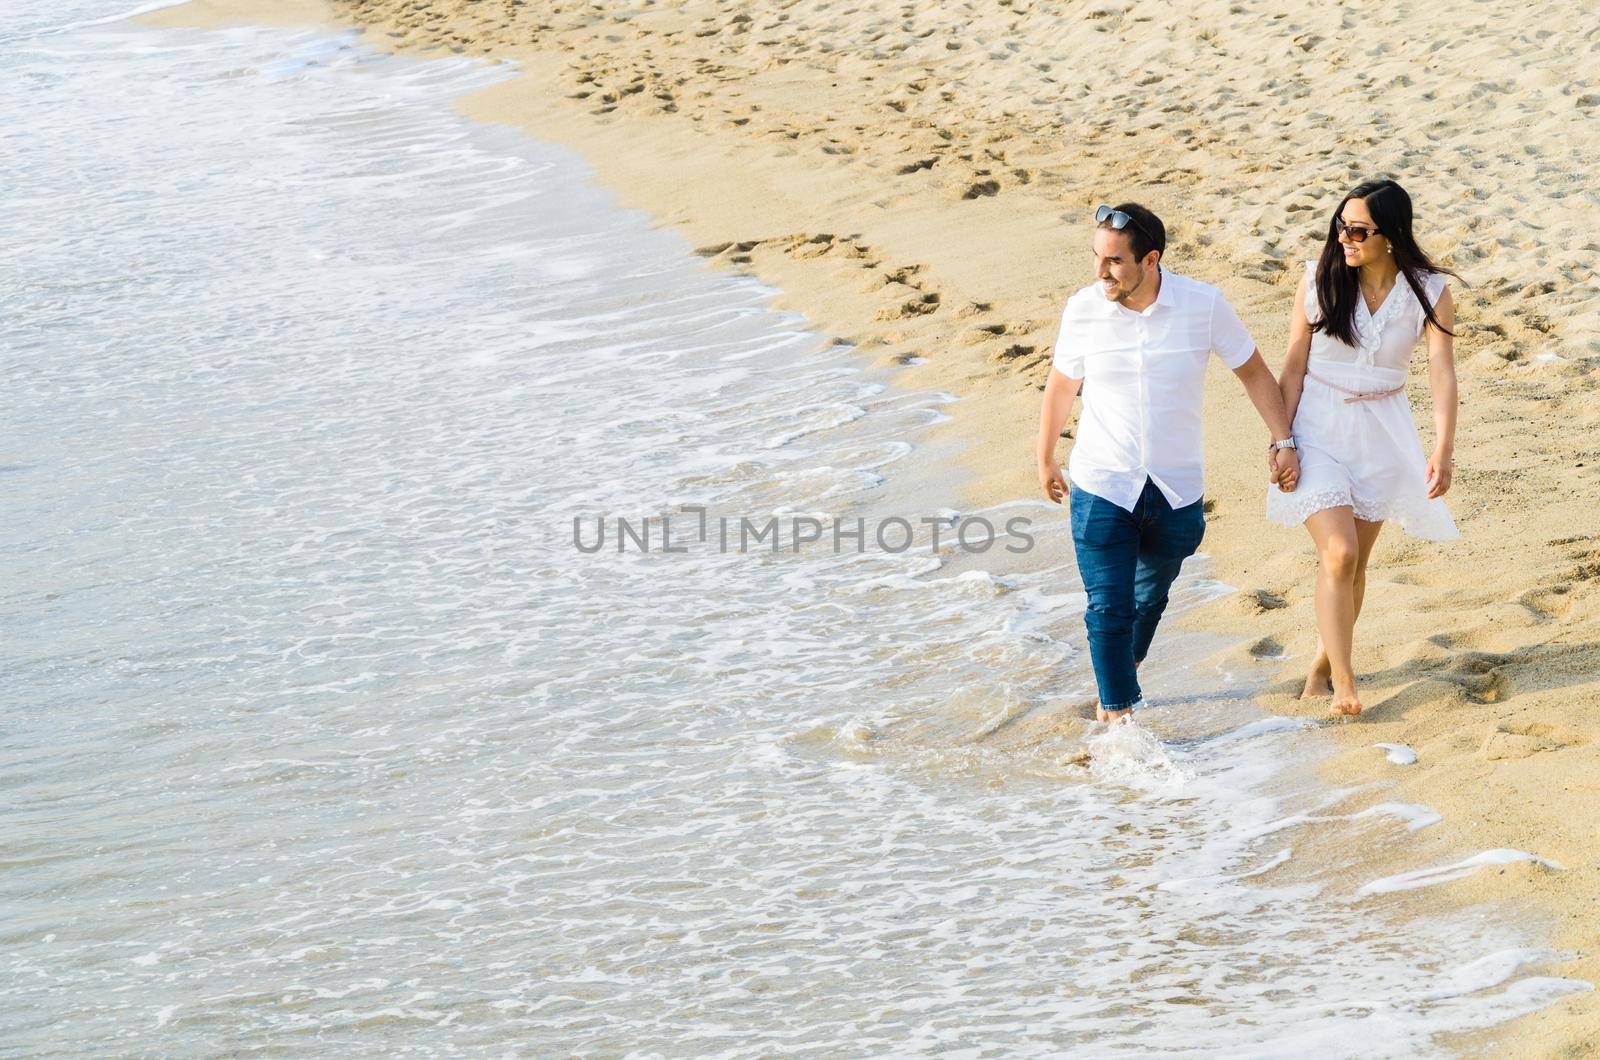 Barefoot young couple walking hand in hand along a beach at the edge of the surf as they spend a relaxing day at the seaside on their summer vacation.